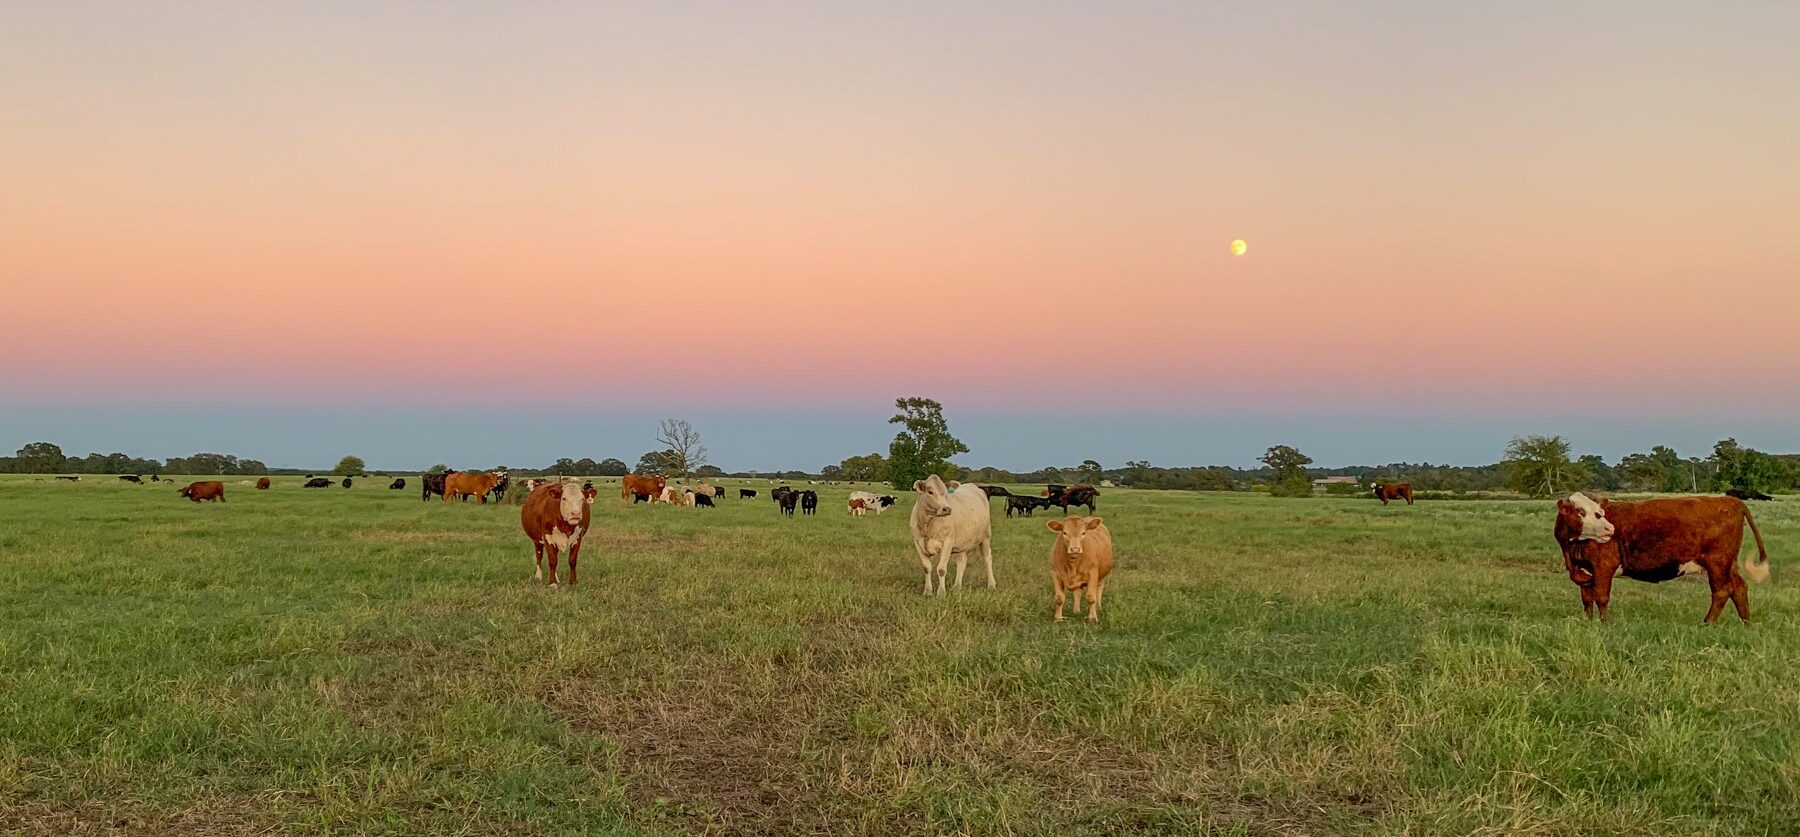 Herd of cattle in pasture during sunset